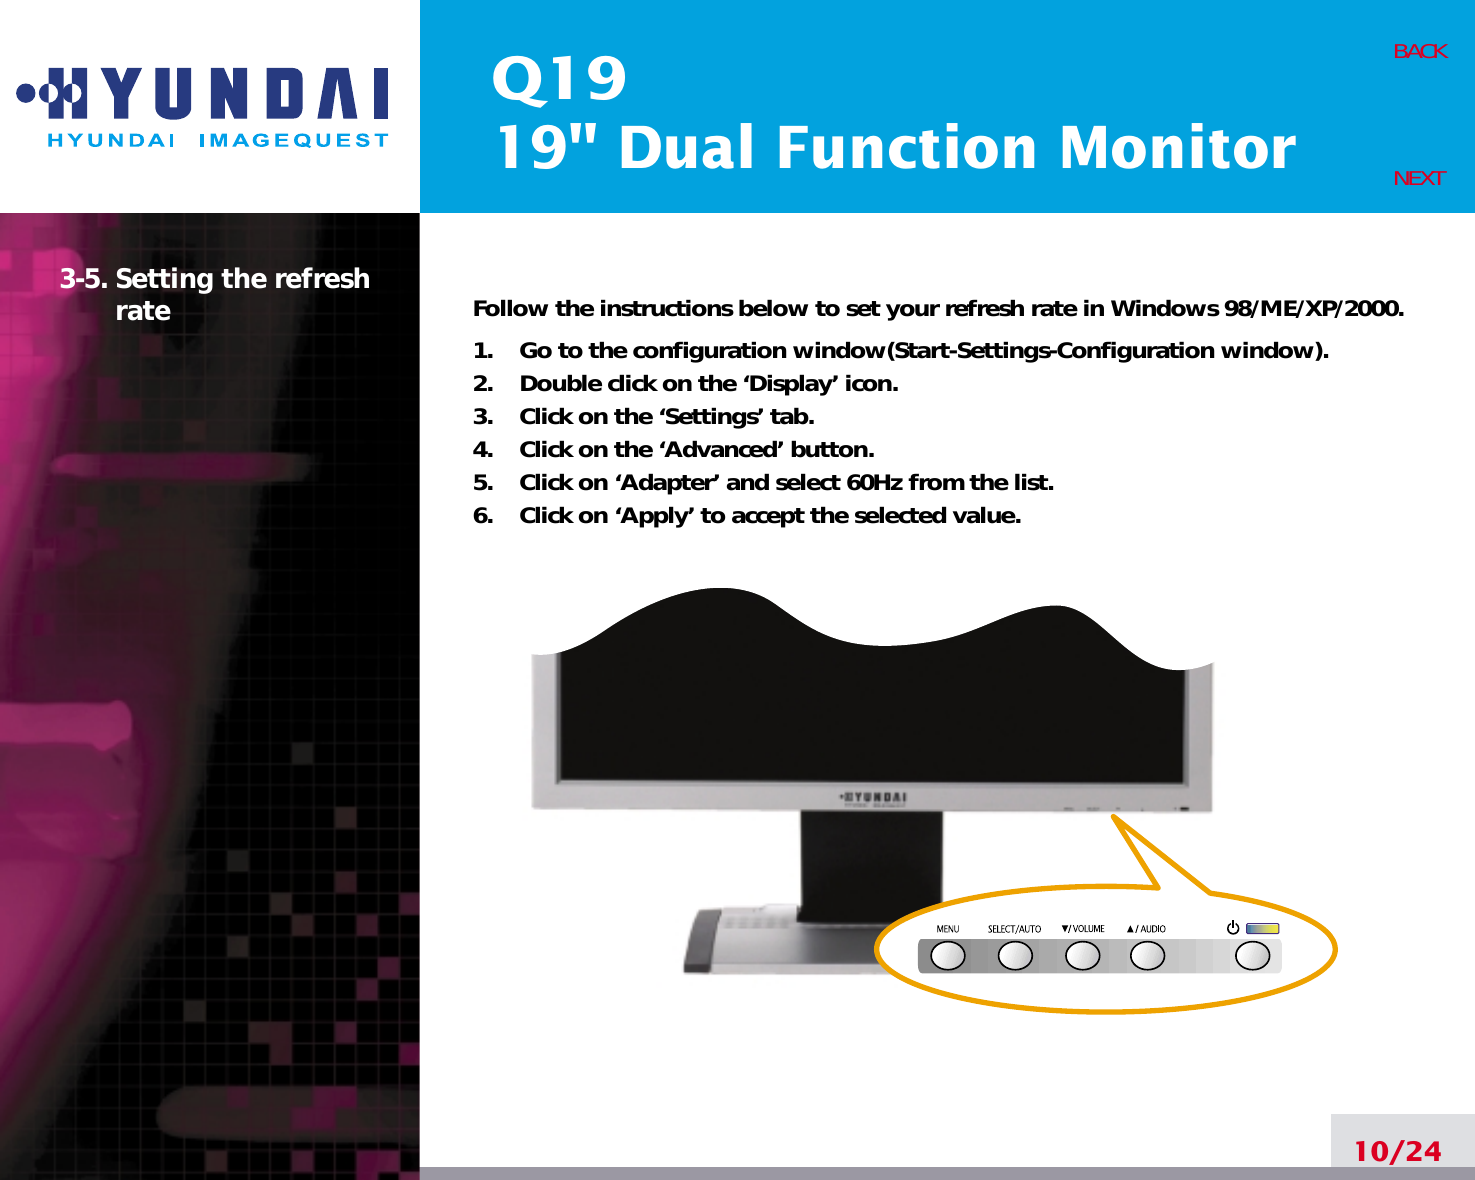 Q1919&quot; Dual Function Monitor3-5. Setting the refreshrate Follow the instructions below to set your refresh rate in Windows 98/ME/XP/2000.1.    Go to the configuration window(Start-Settings-Configuration window).2.    Double click on the ‘Display’ icon.3.    Click on the ‘Settings’ tab.4.    Click on the ‘Advanced’ button.5.    Click on ‘Adapter’ and select 60Hz from the list.6.    Click on ‘Apply’ to accept the selected value.10/24BACKNEXT